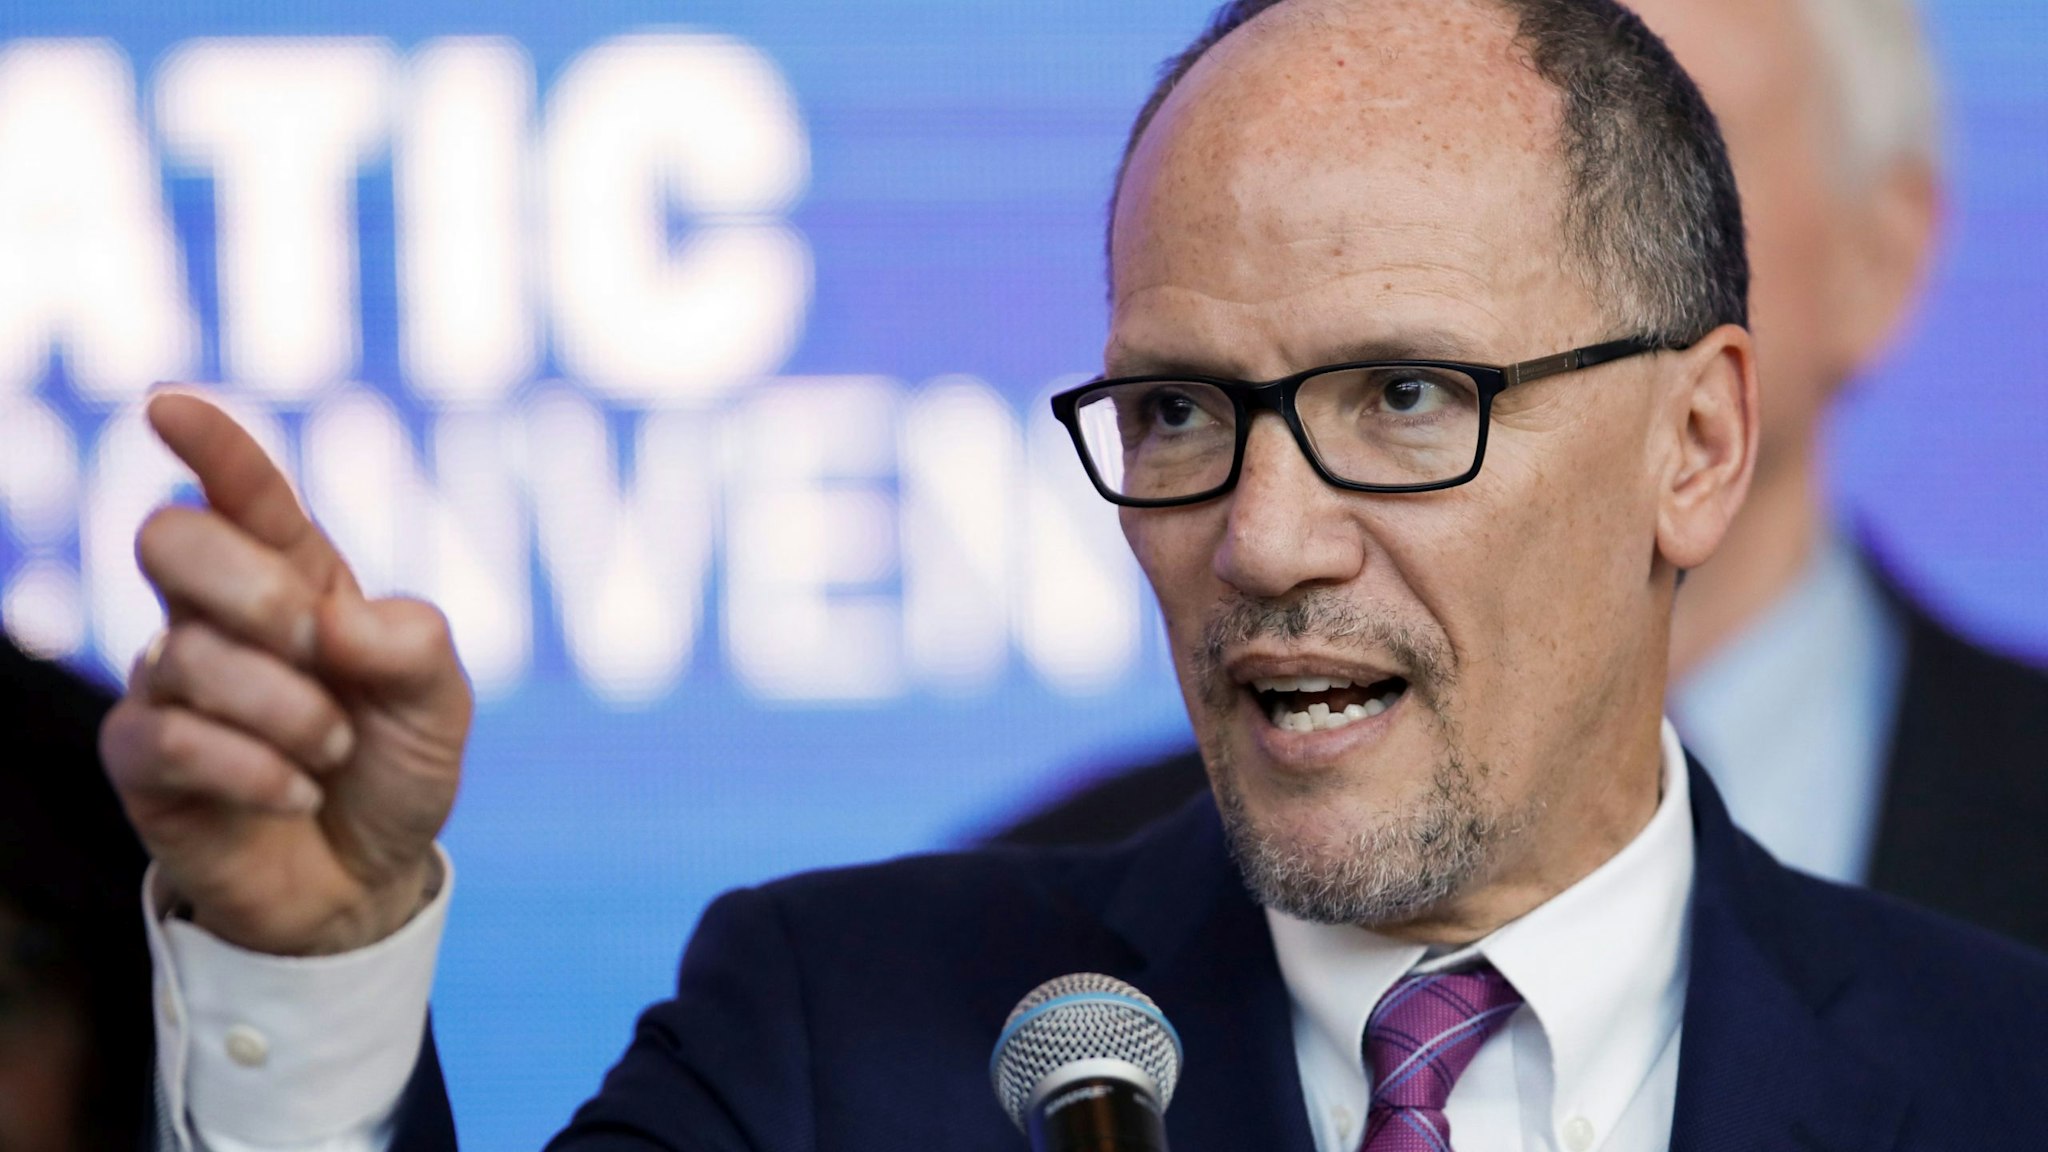 Chair of the Democratic National Committee Tom Perez speaks during a press conference at the Fiserv Forum in Milwaukee, Wisconsin on March 11, 2019, to announce the selection of Milwaukee as the 2020 Democratic National Convention host city. - Democrats have chosen Milwaukee as the site of their 2020 election convention, in an effort to win back swing voters in the American "Rust Belt" who helped elect Donald Trump. In announcing the decision, the Democratic Party emphasized it is the first time a Midwestern city other than Chicago has been chosen to host a party convention in more than 100 years. (Photo by Kamil Krzaczynski / AFP) (Photo credit should read KAMIL KRZACZYNSKI/AFP via Getty Images)